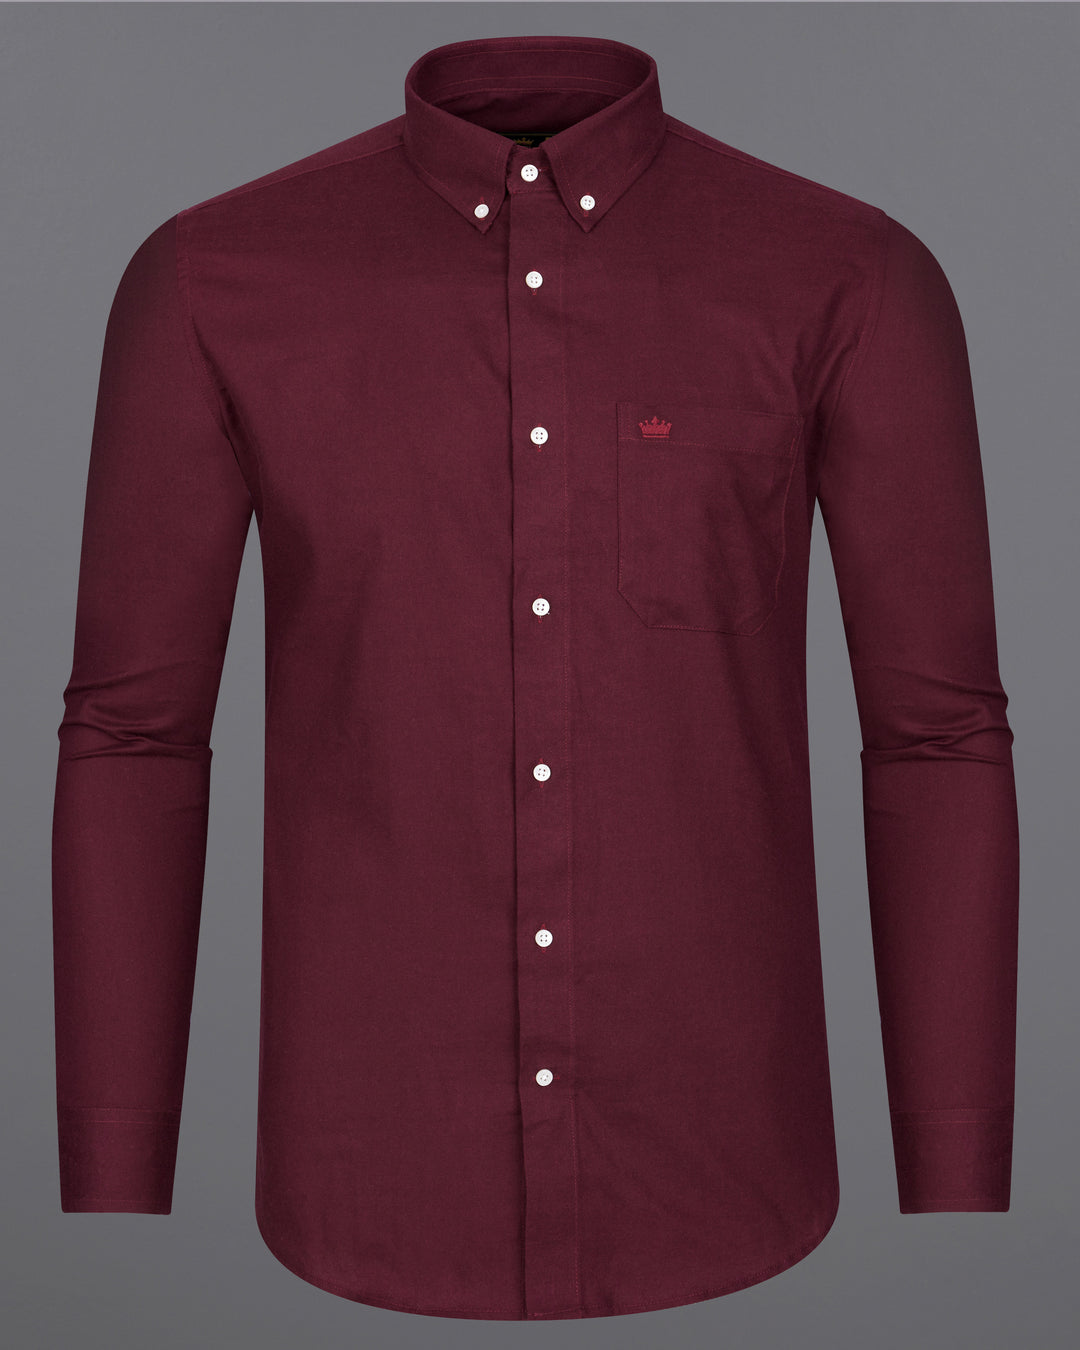 9 Maroon Shirt Matching Pants Ideas For Men To Look Stylish